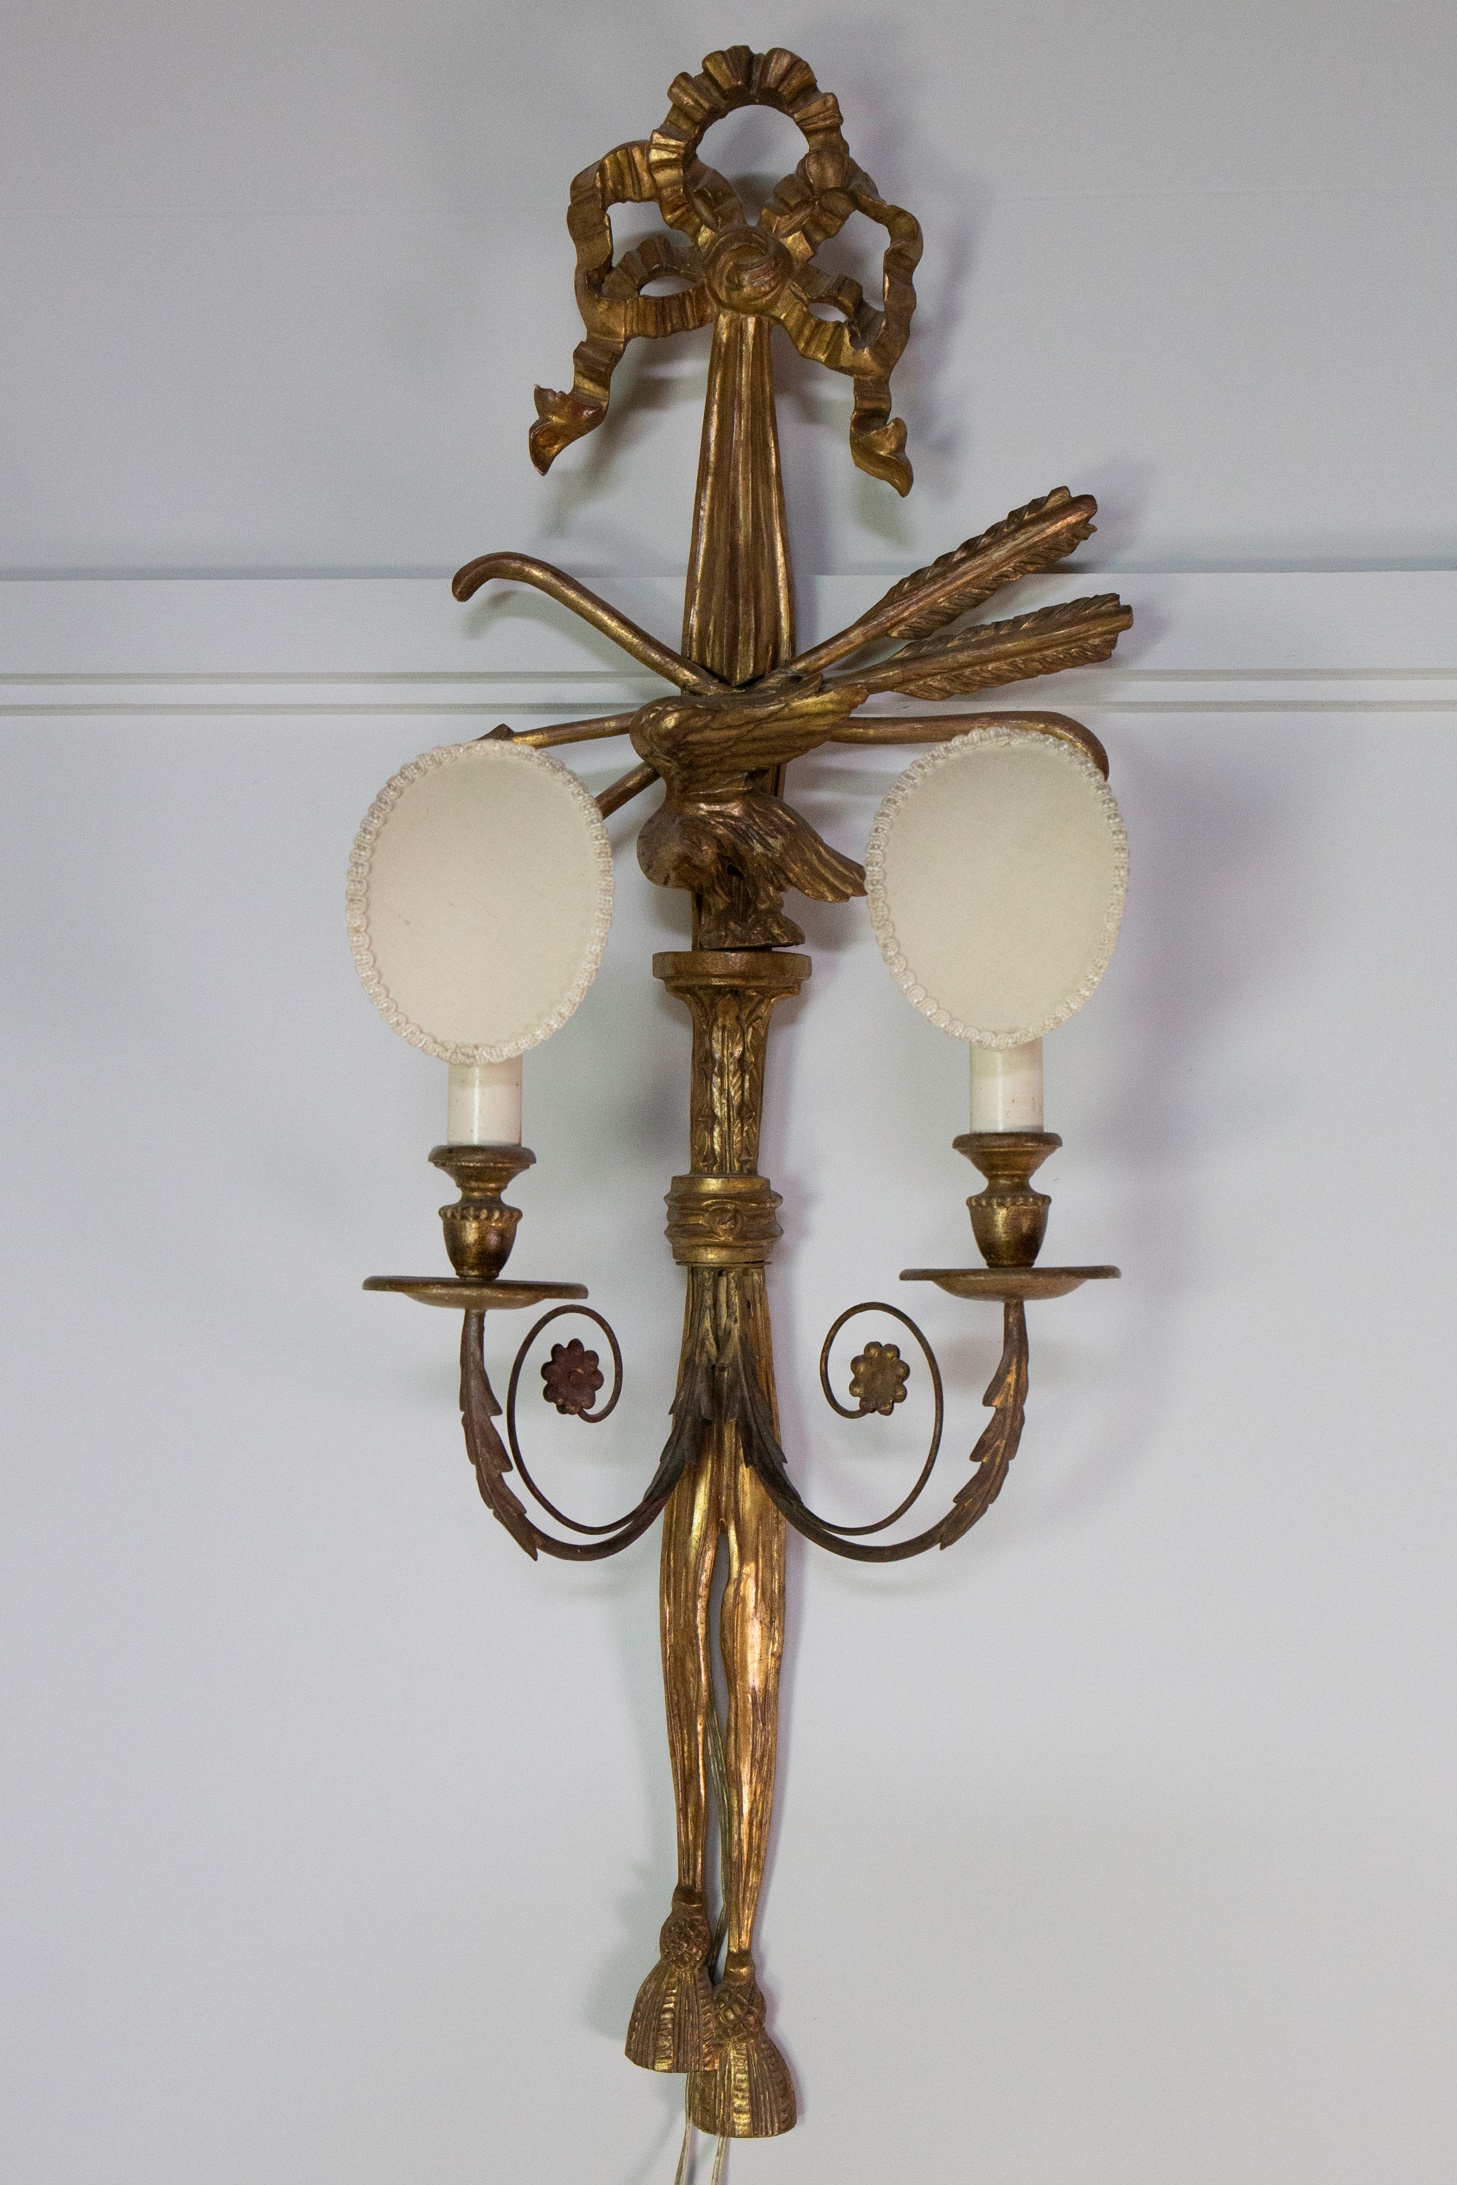 A GILTWOOD WALL CANDLE SCONCE